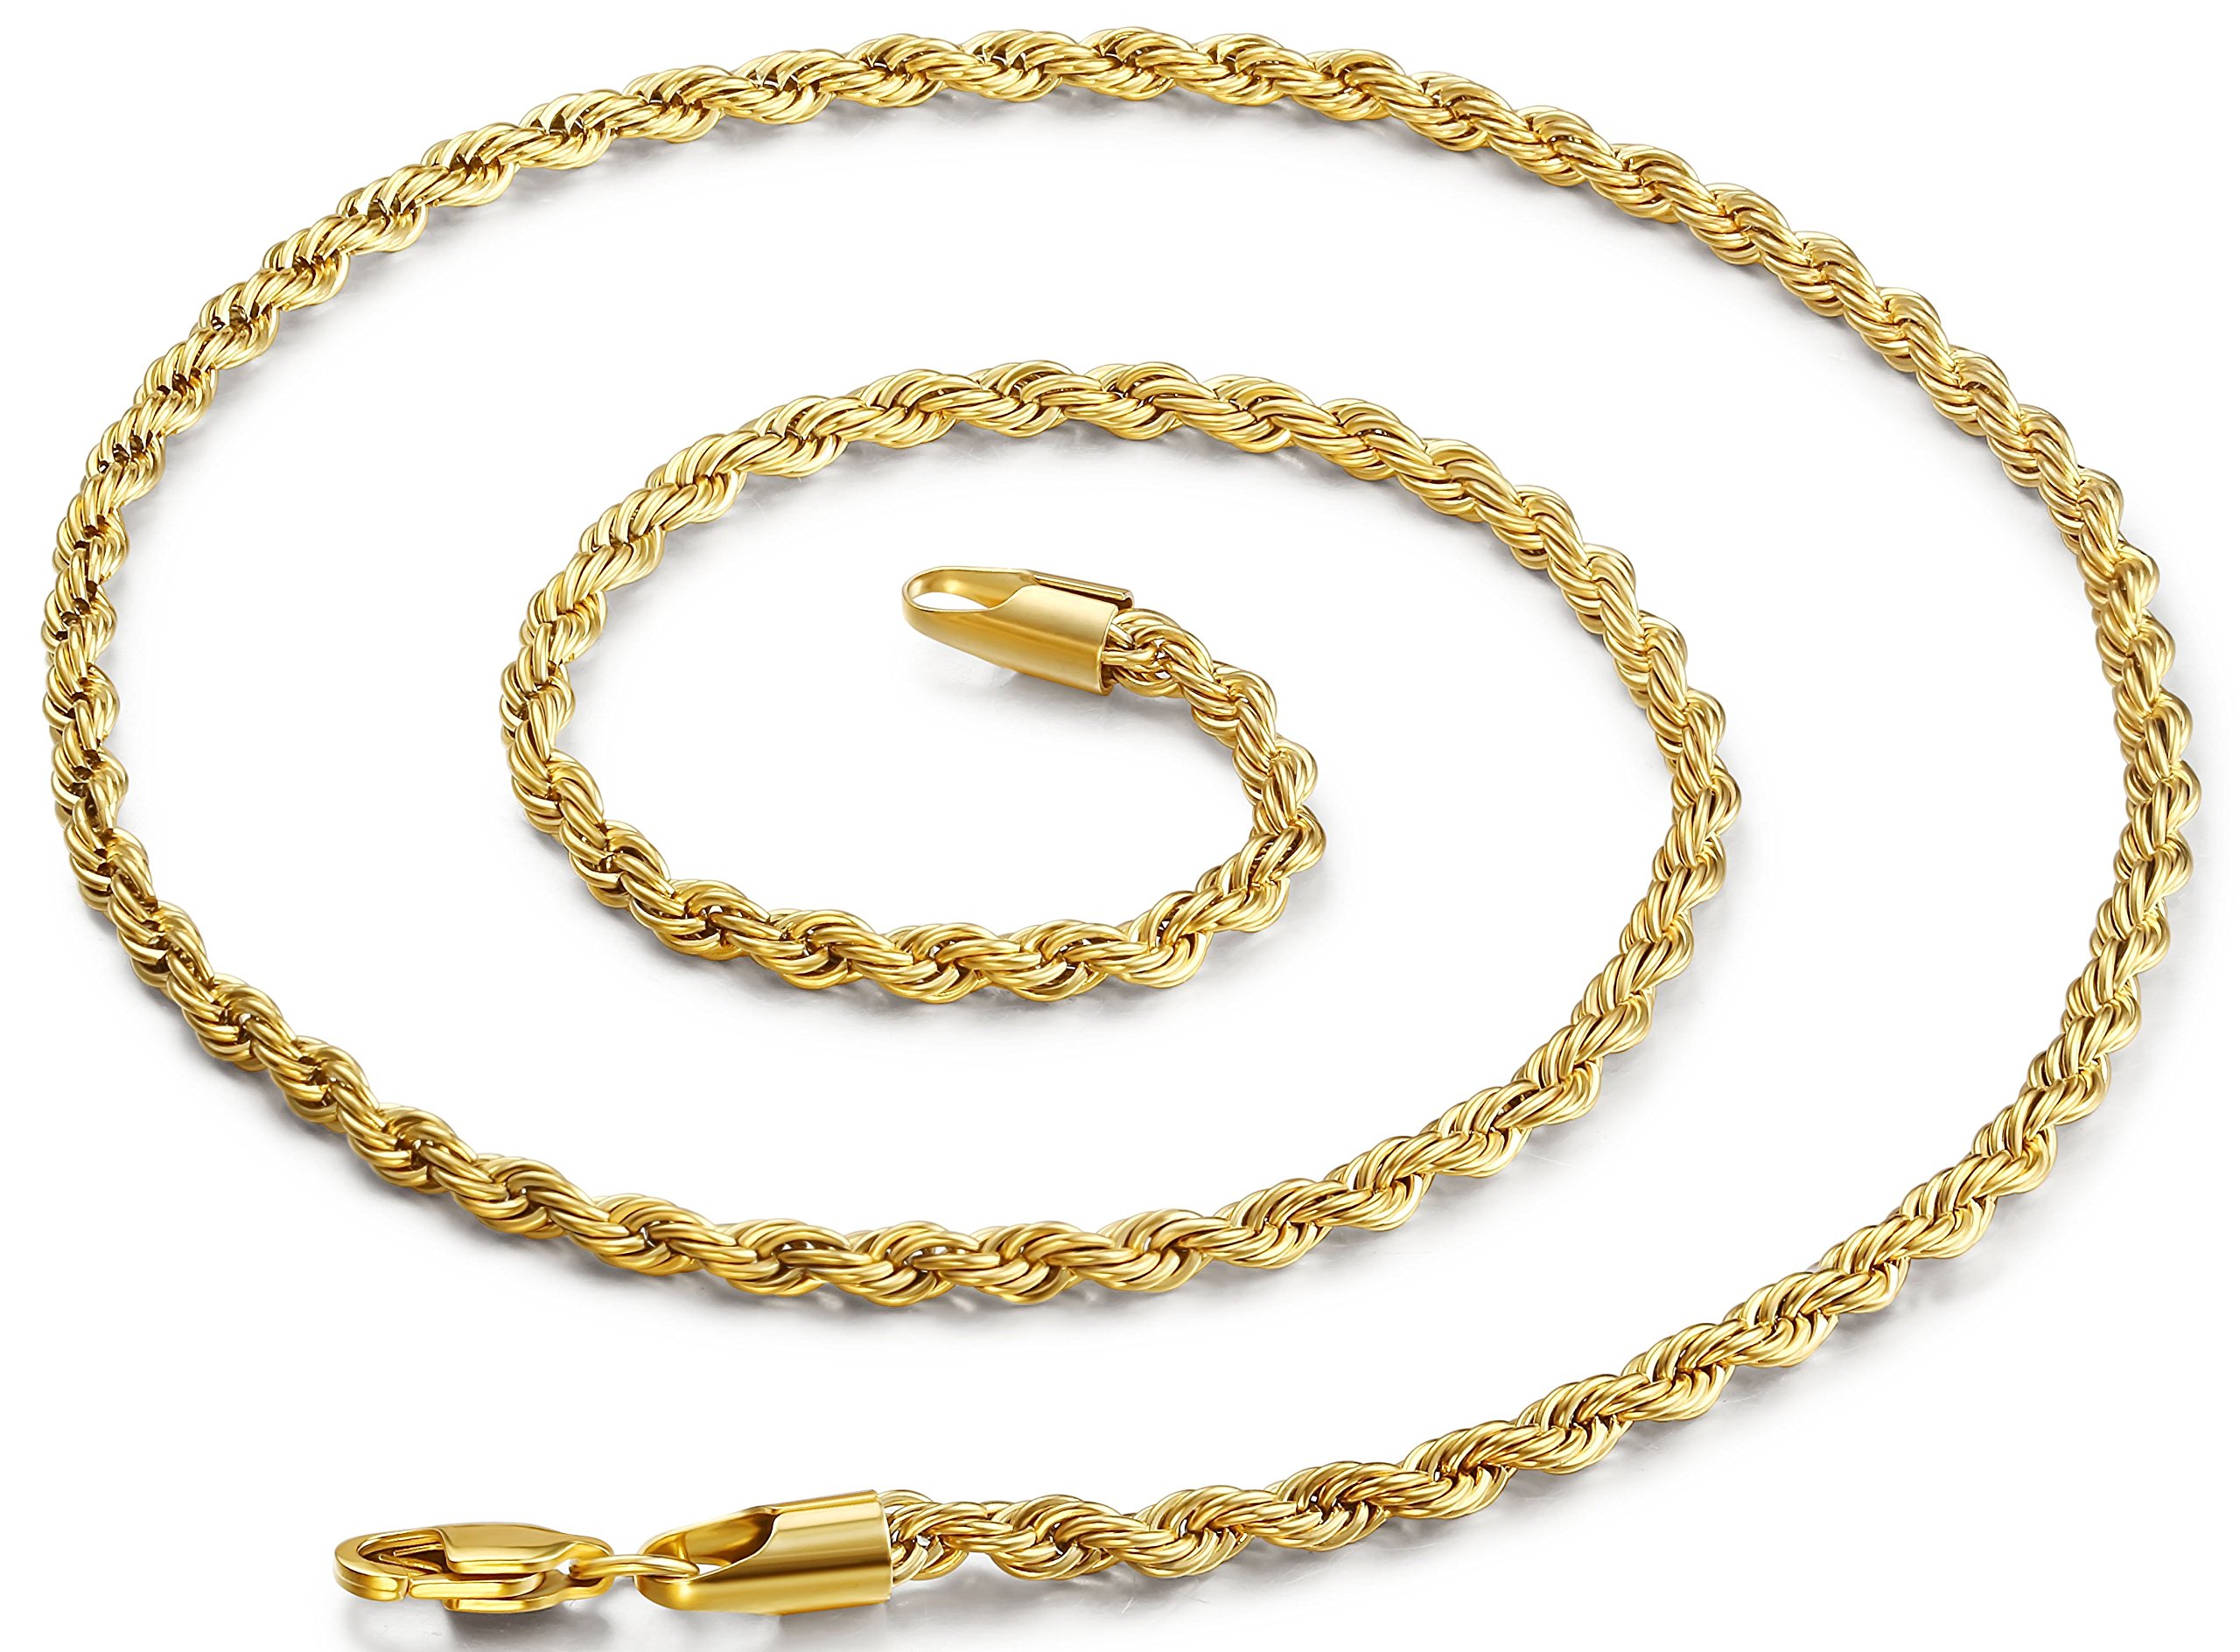 FIBO STEEL 18k Real Gold Plated 2.5-8 MM Stainless Steel Mens Womens Necklace Twist Rope Chain, 16-36 inches